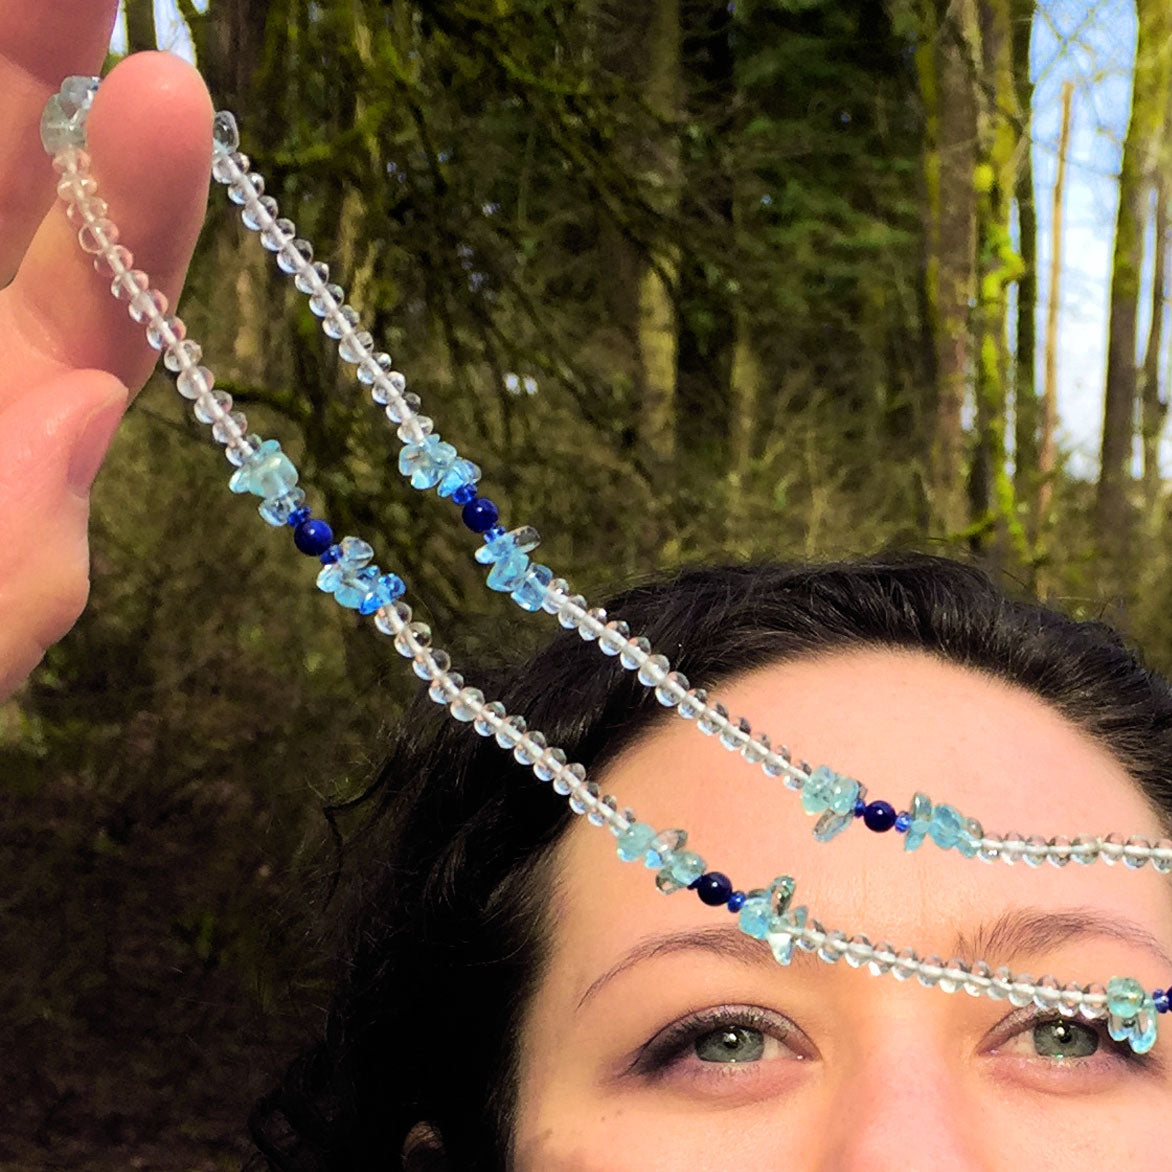 Crystal healing Star Aqua gemstone necklace known to rejuvenate oyour mind and brain